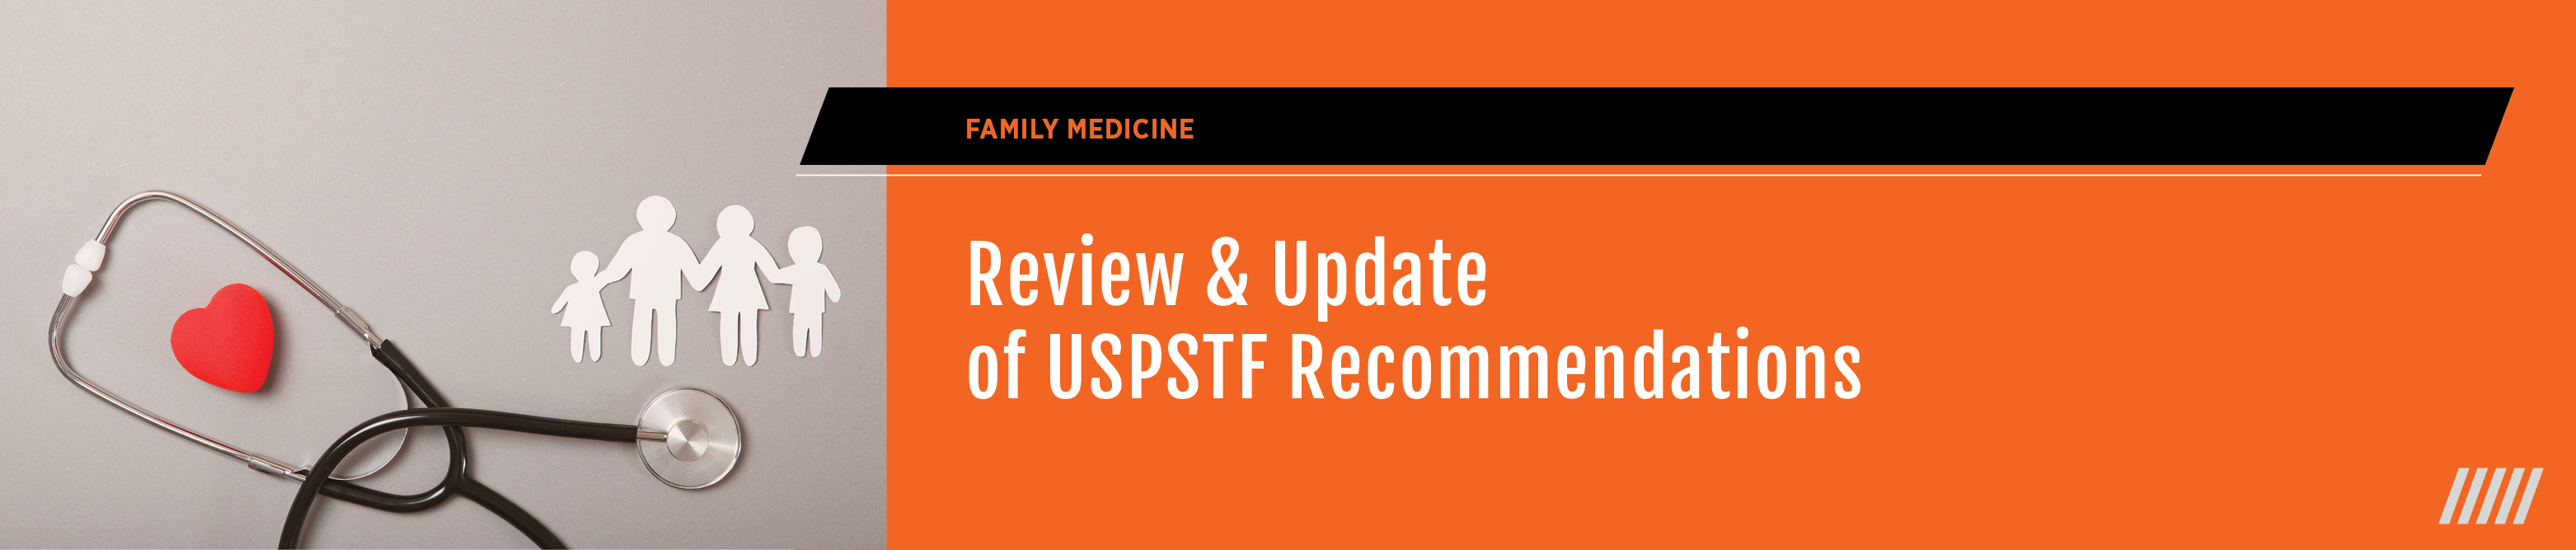 Review & Update of USPSTF Recommendations - 2021 Spring Fling Banner